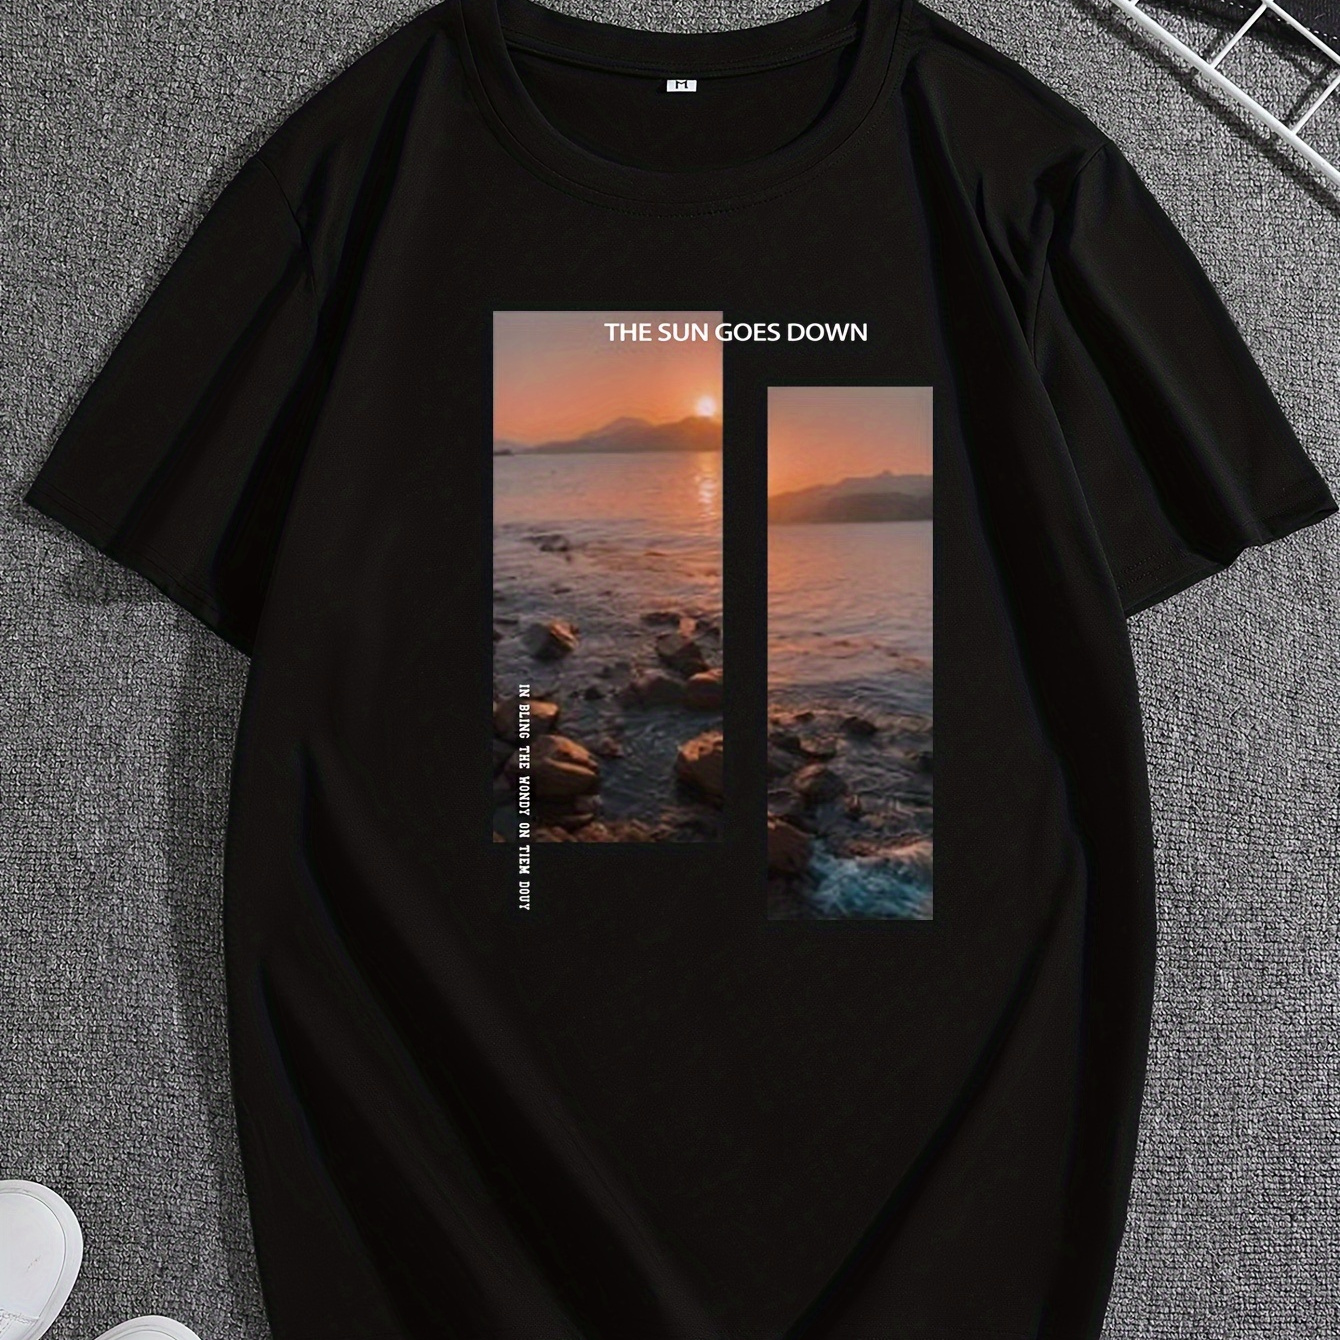 

"the Sun Goes Down..." And Cartoon Sunset View Graphic Print, Men's Novel Design T-shirt, Casual Comfy Tees For Summer, Men's Clothing Tops For Daily Activities